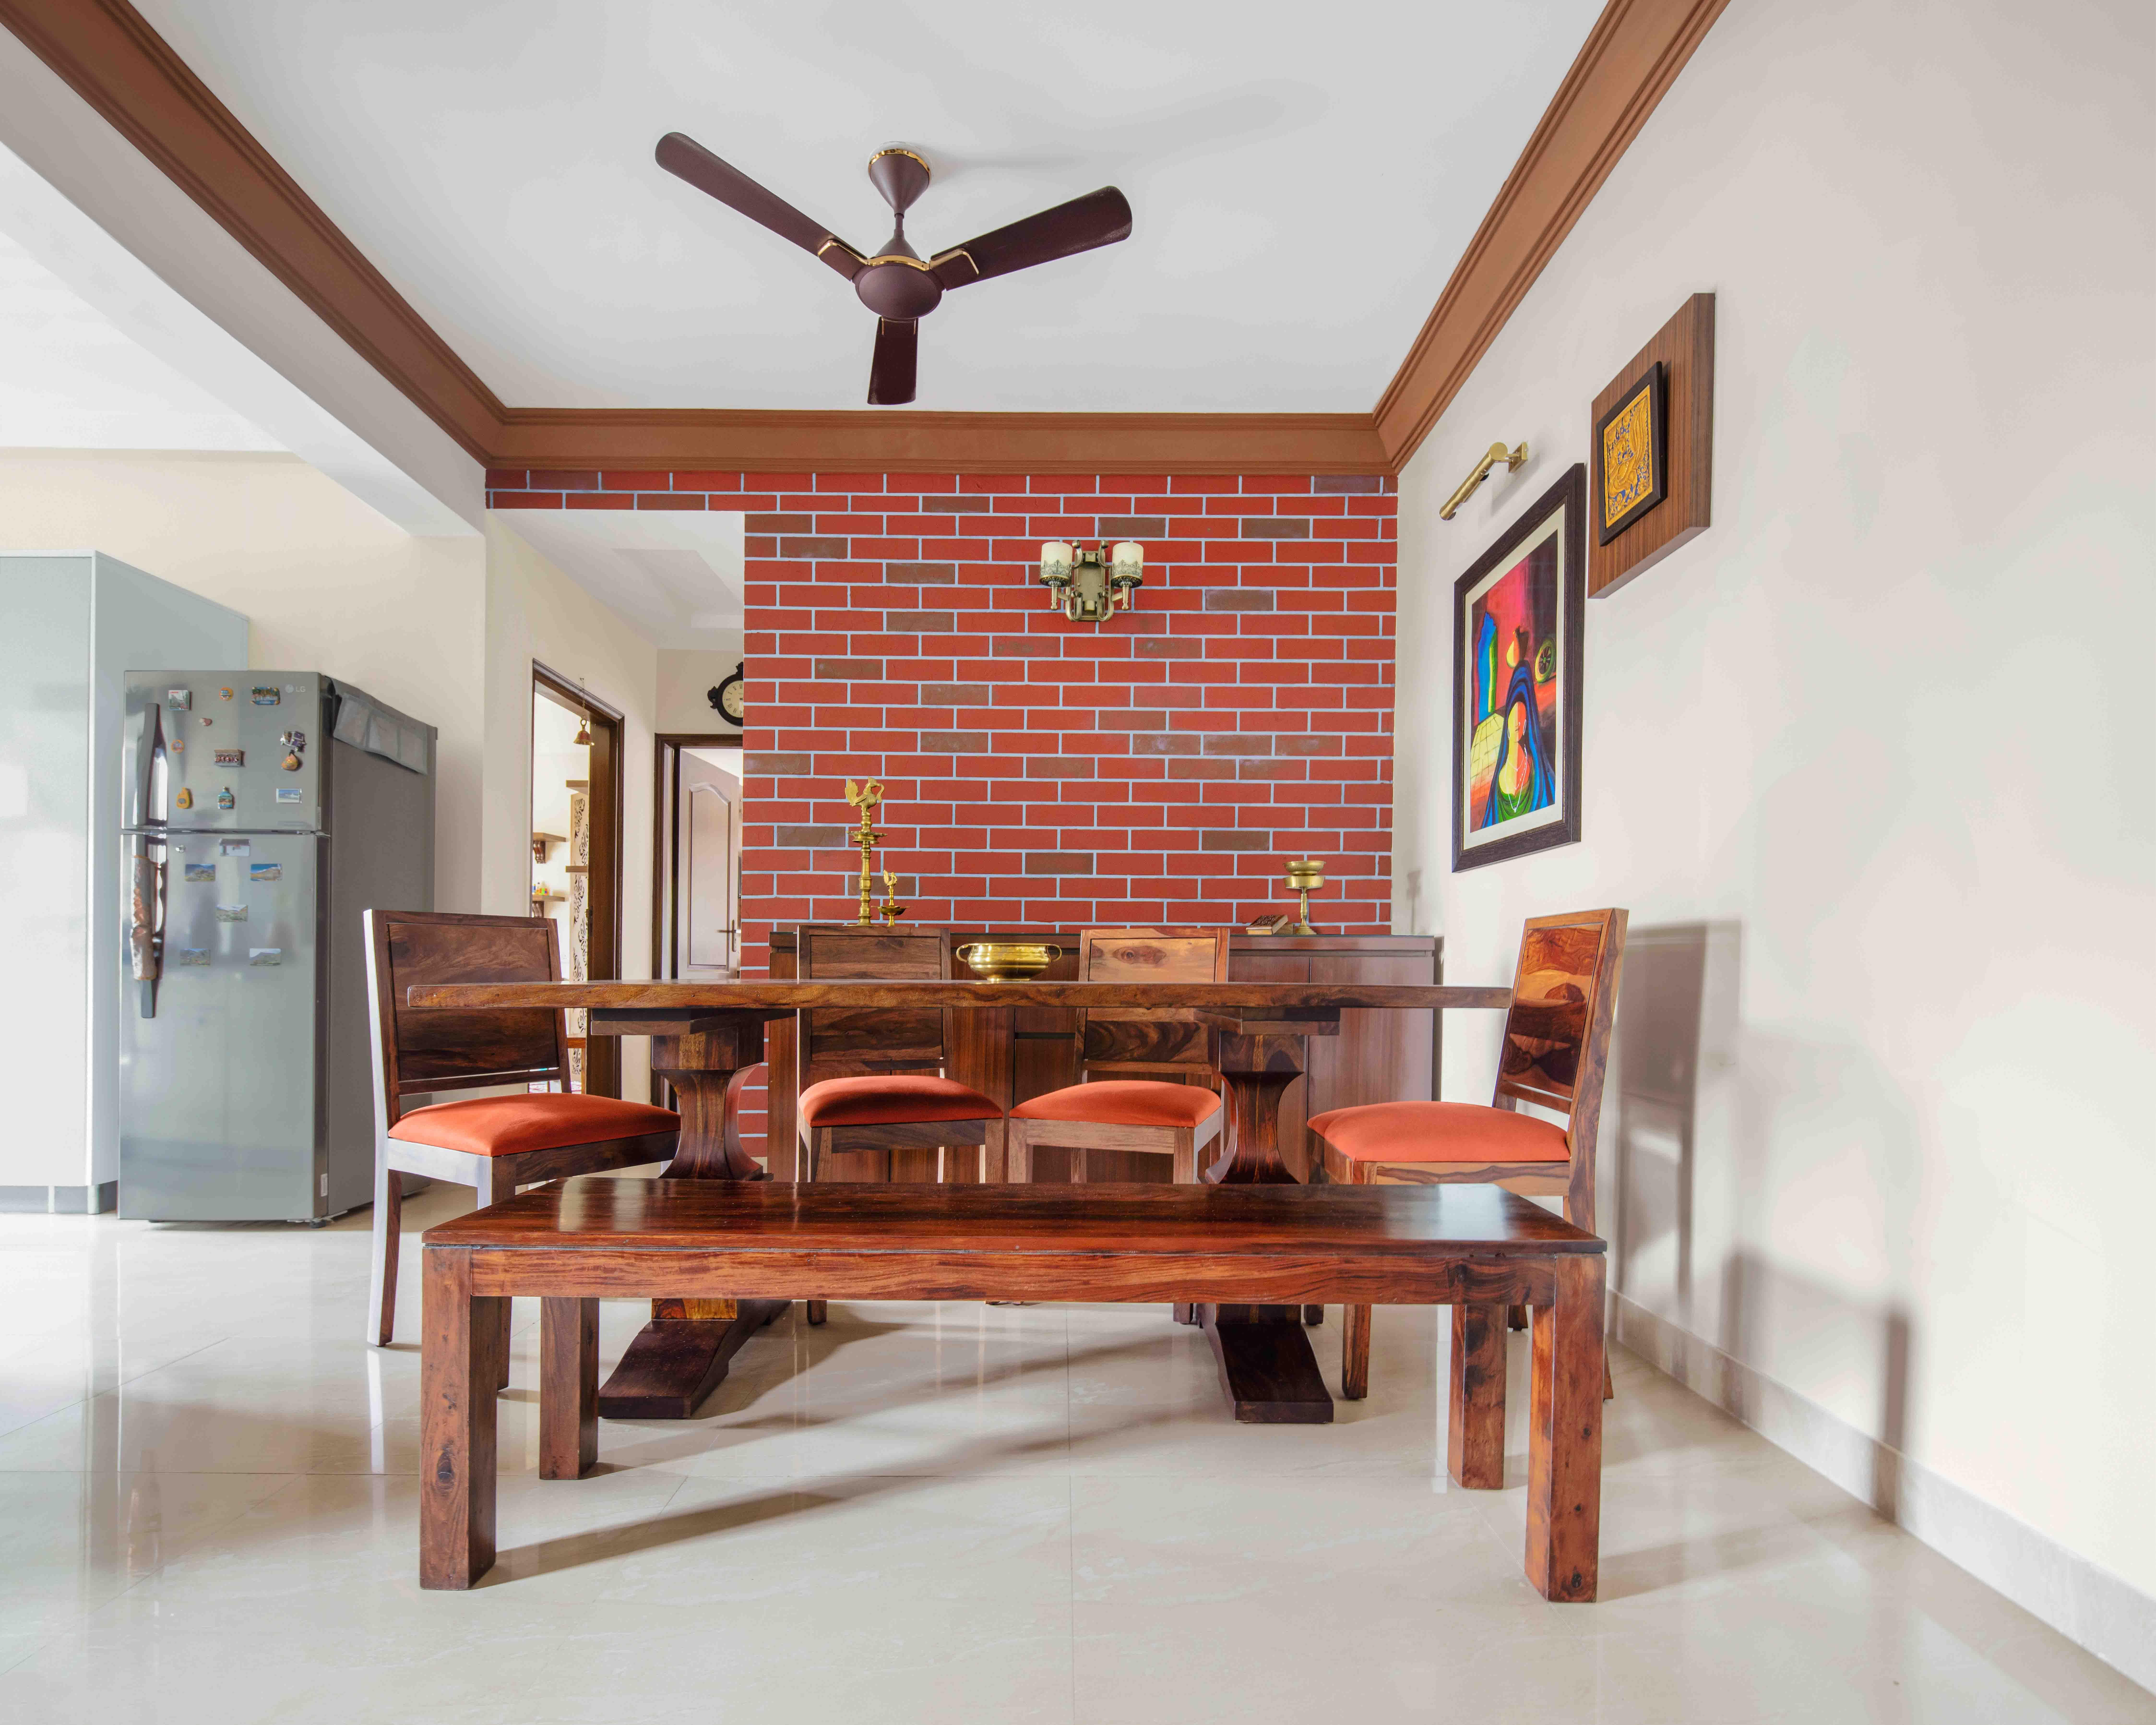 Contemporary Dining Room Design With Red Brick-Patterned Wallpaper